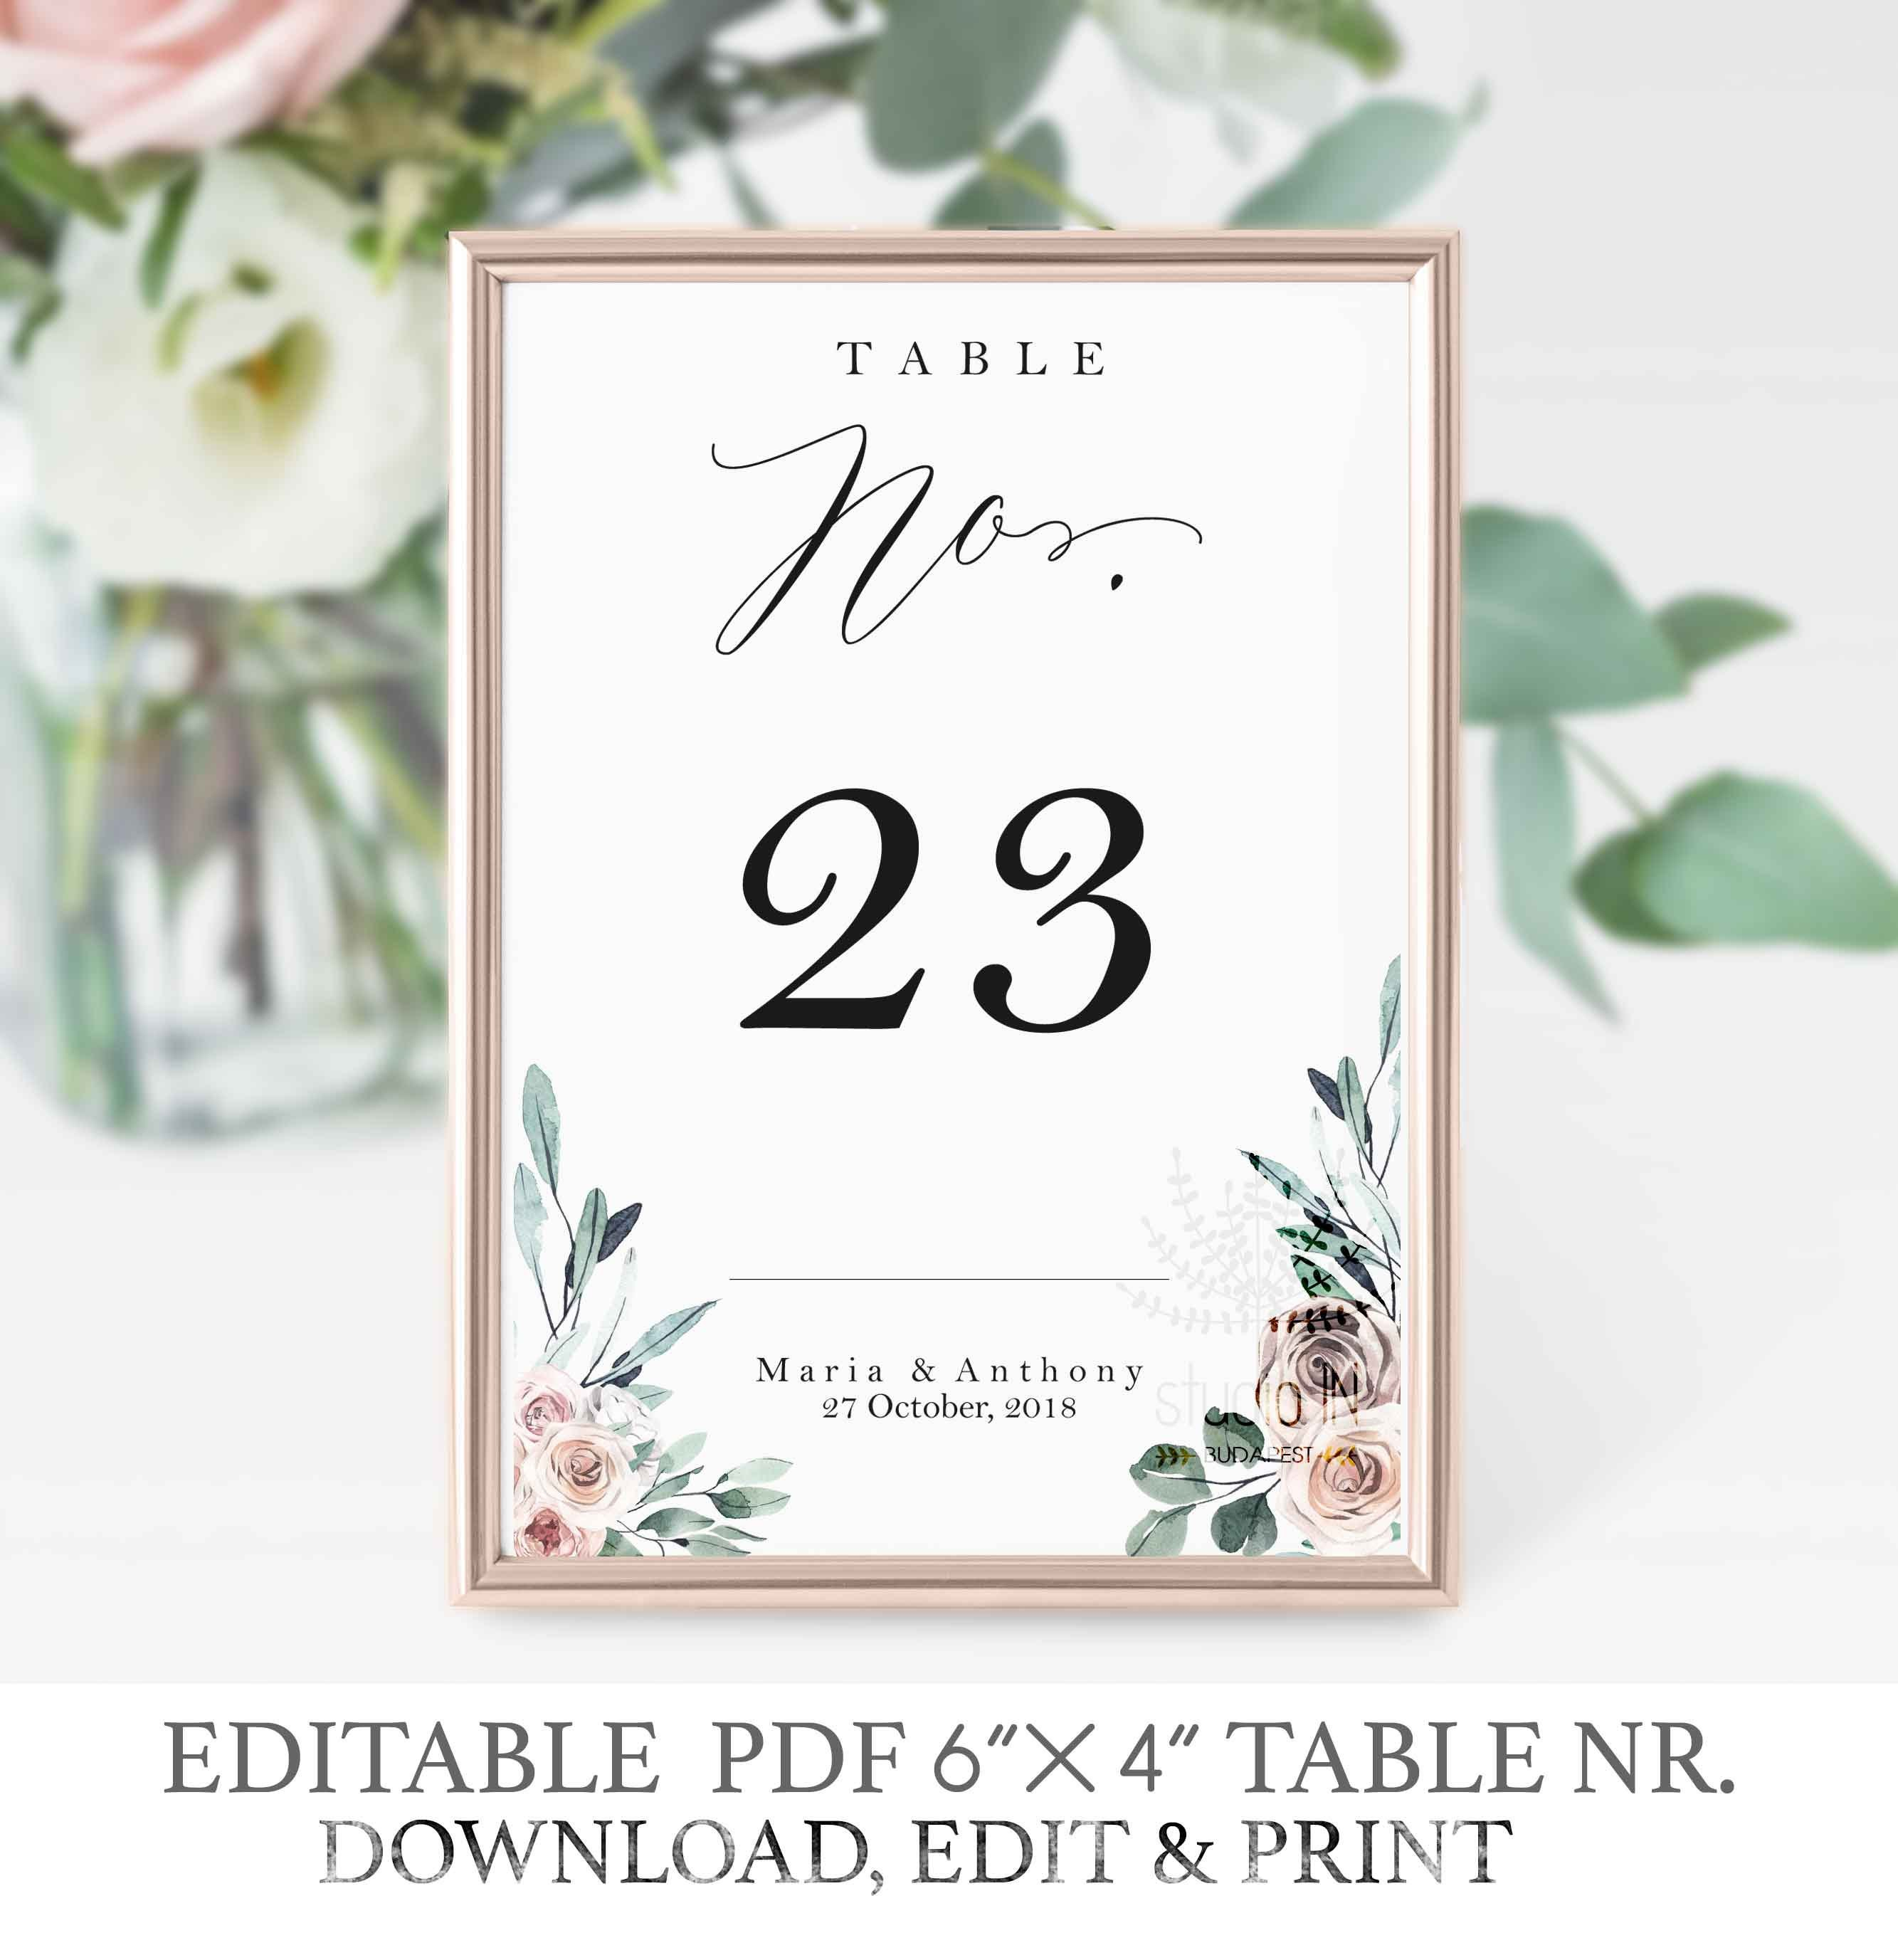 Boho Table Number Card Boho Floral Table Card Template  Etsy pertaining to Table Number Cards Template